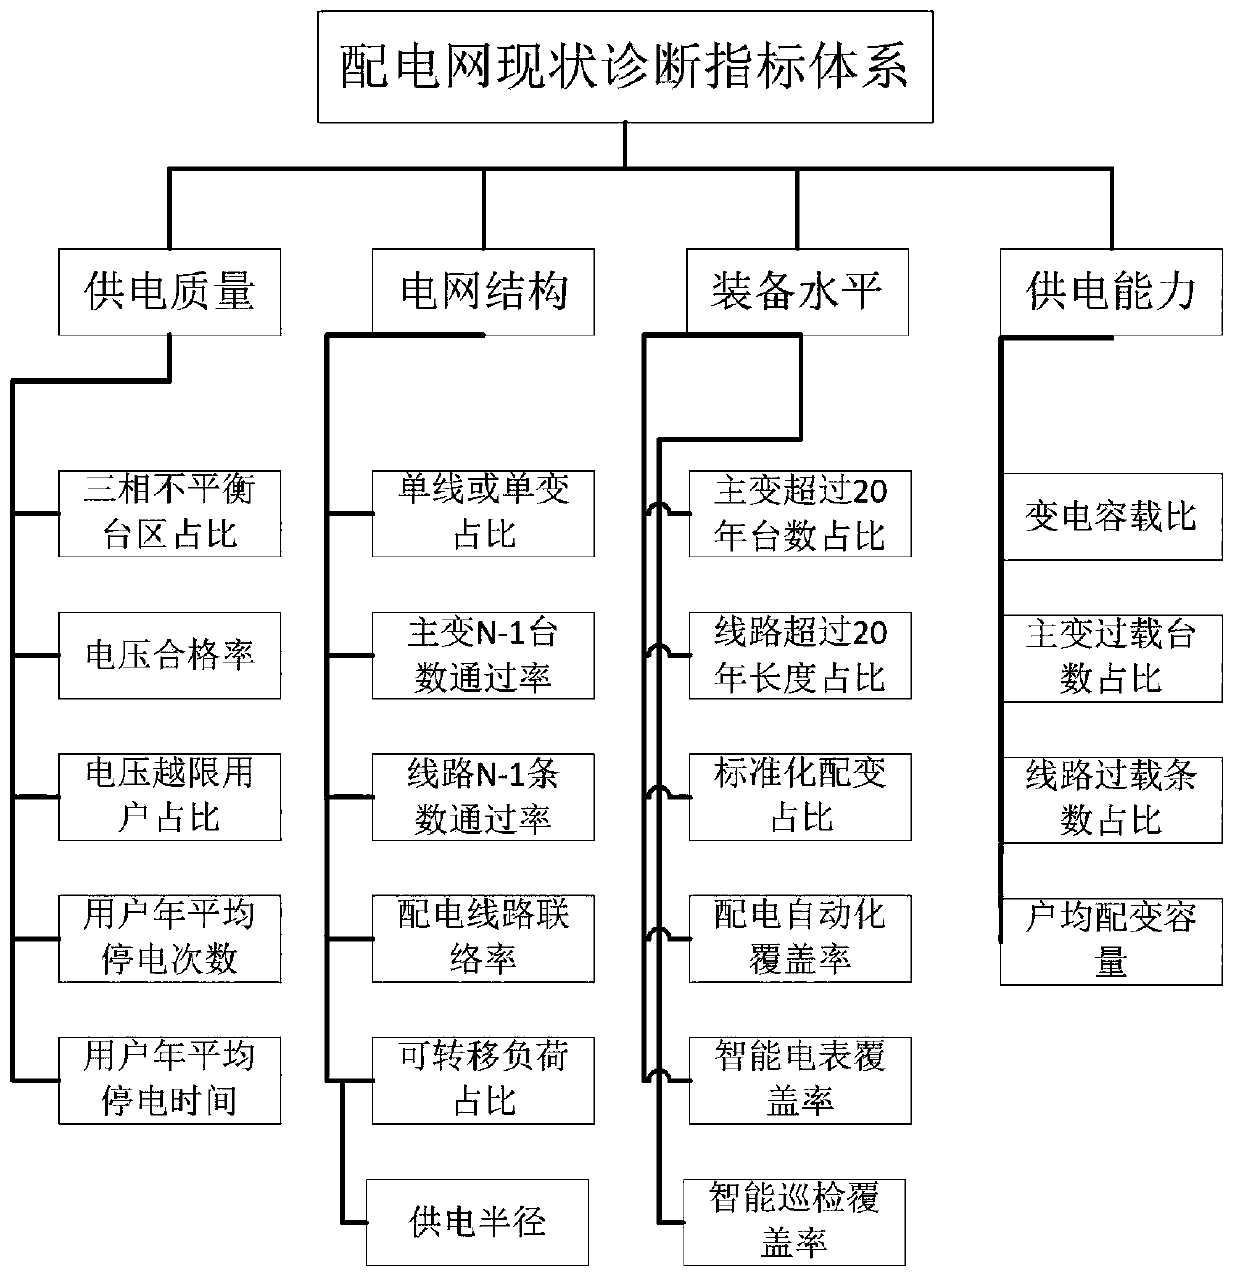 Power distribution network diagnosis and evaluation index weight assignment method based on fuzzy hierarchy and CRITIC method